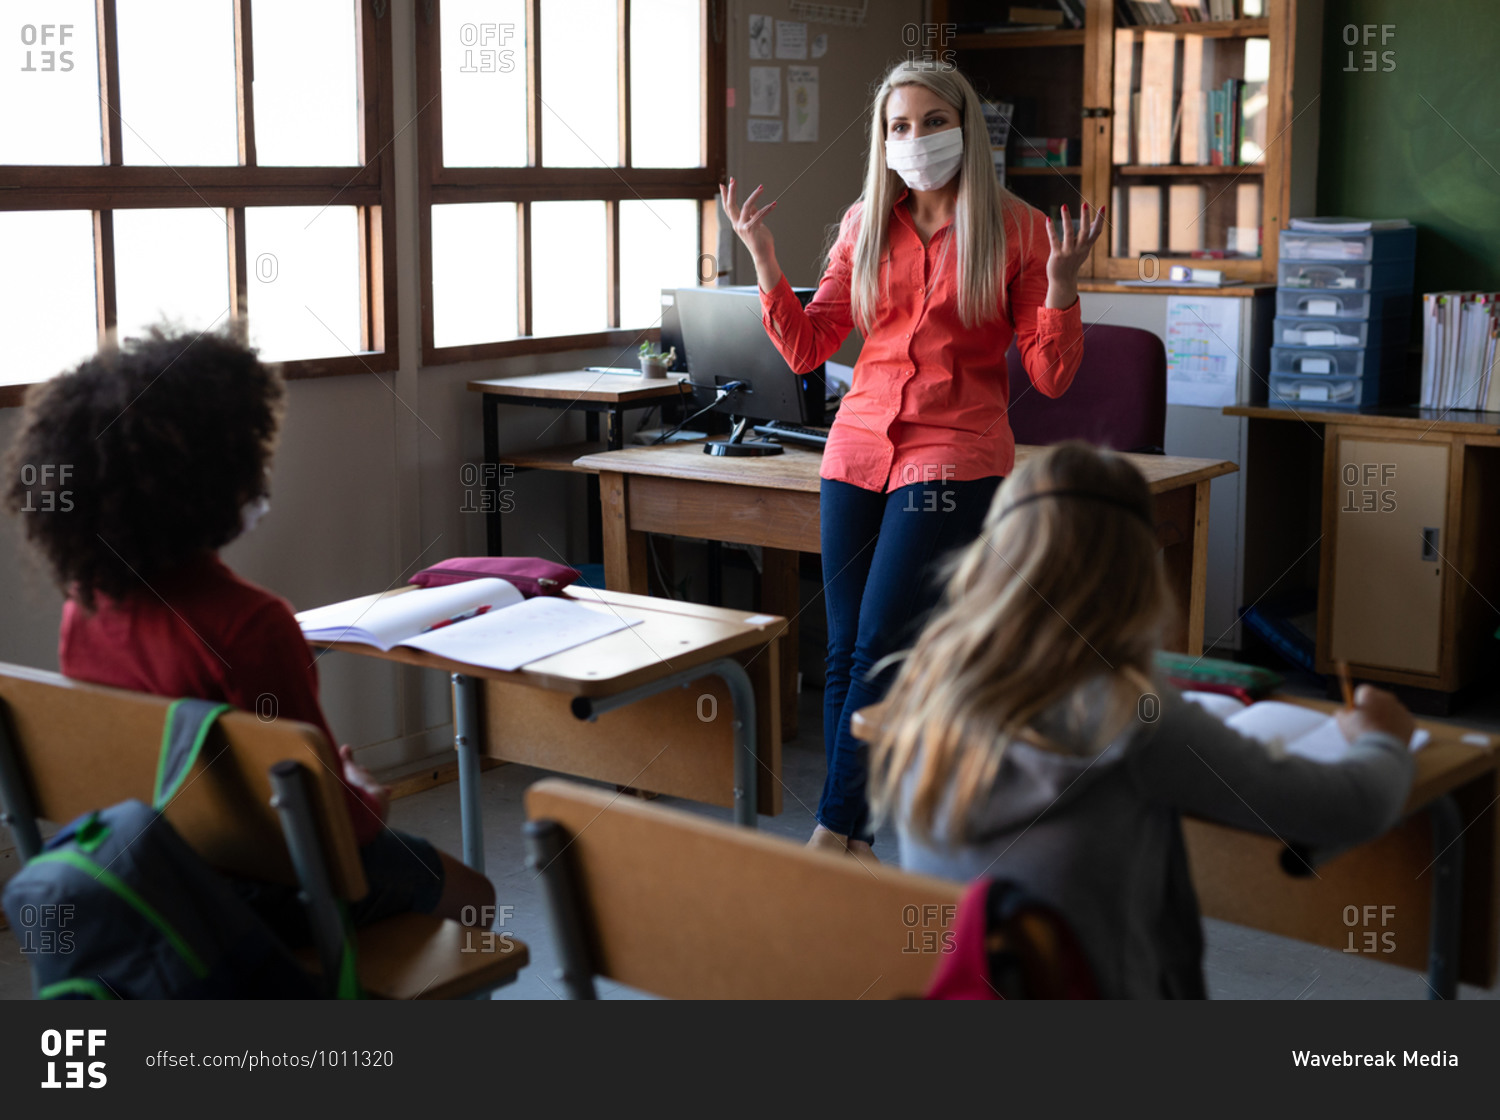 Female Caucasian teacher wearing face mask teaching in class at school. Primary education social distancing health safety during Covid19 Coronavirus pandemic.